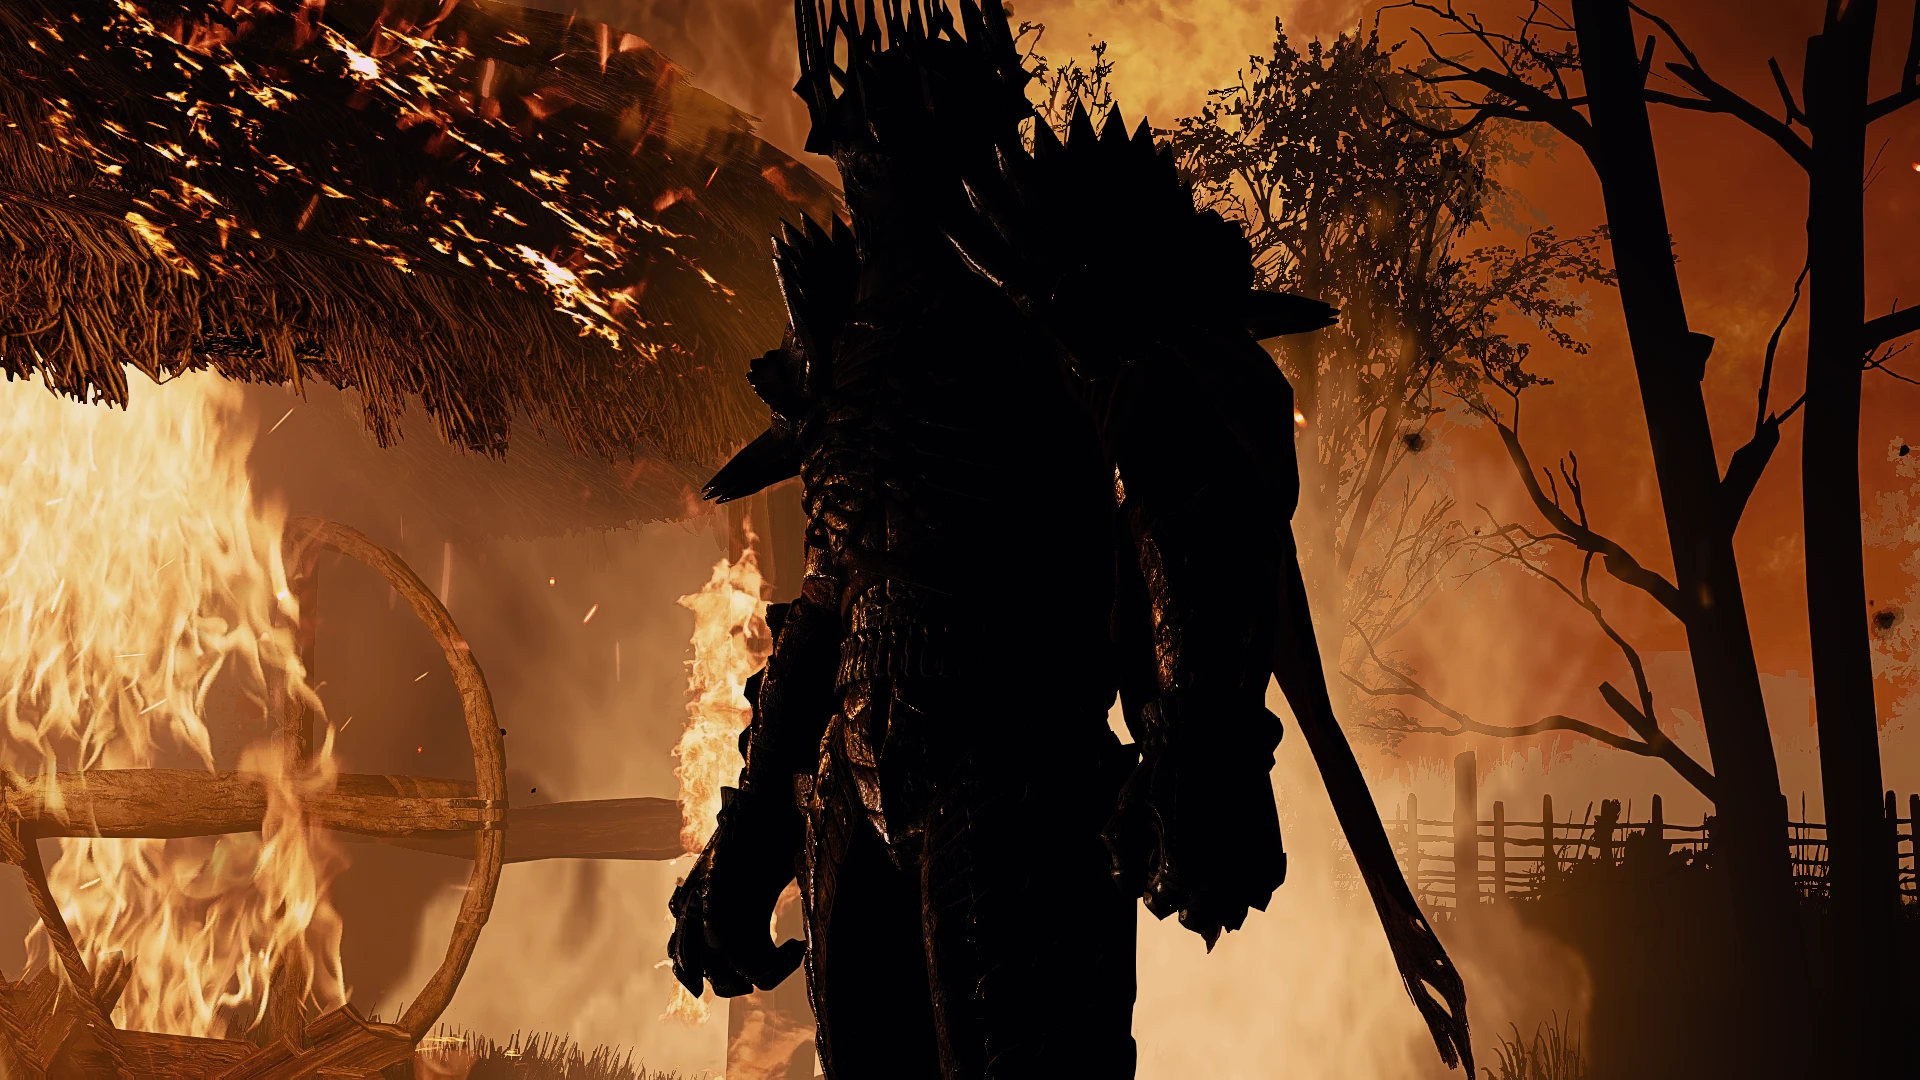 Bow and die before your new ruler at The Witcher 3 Nexus 